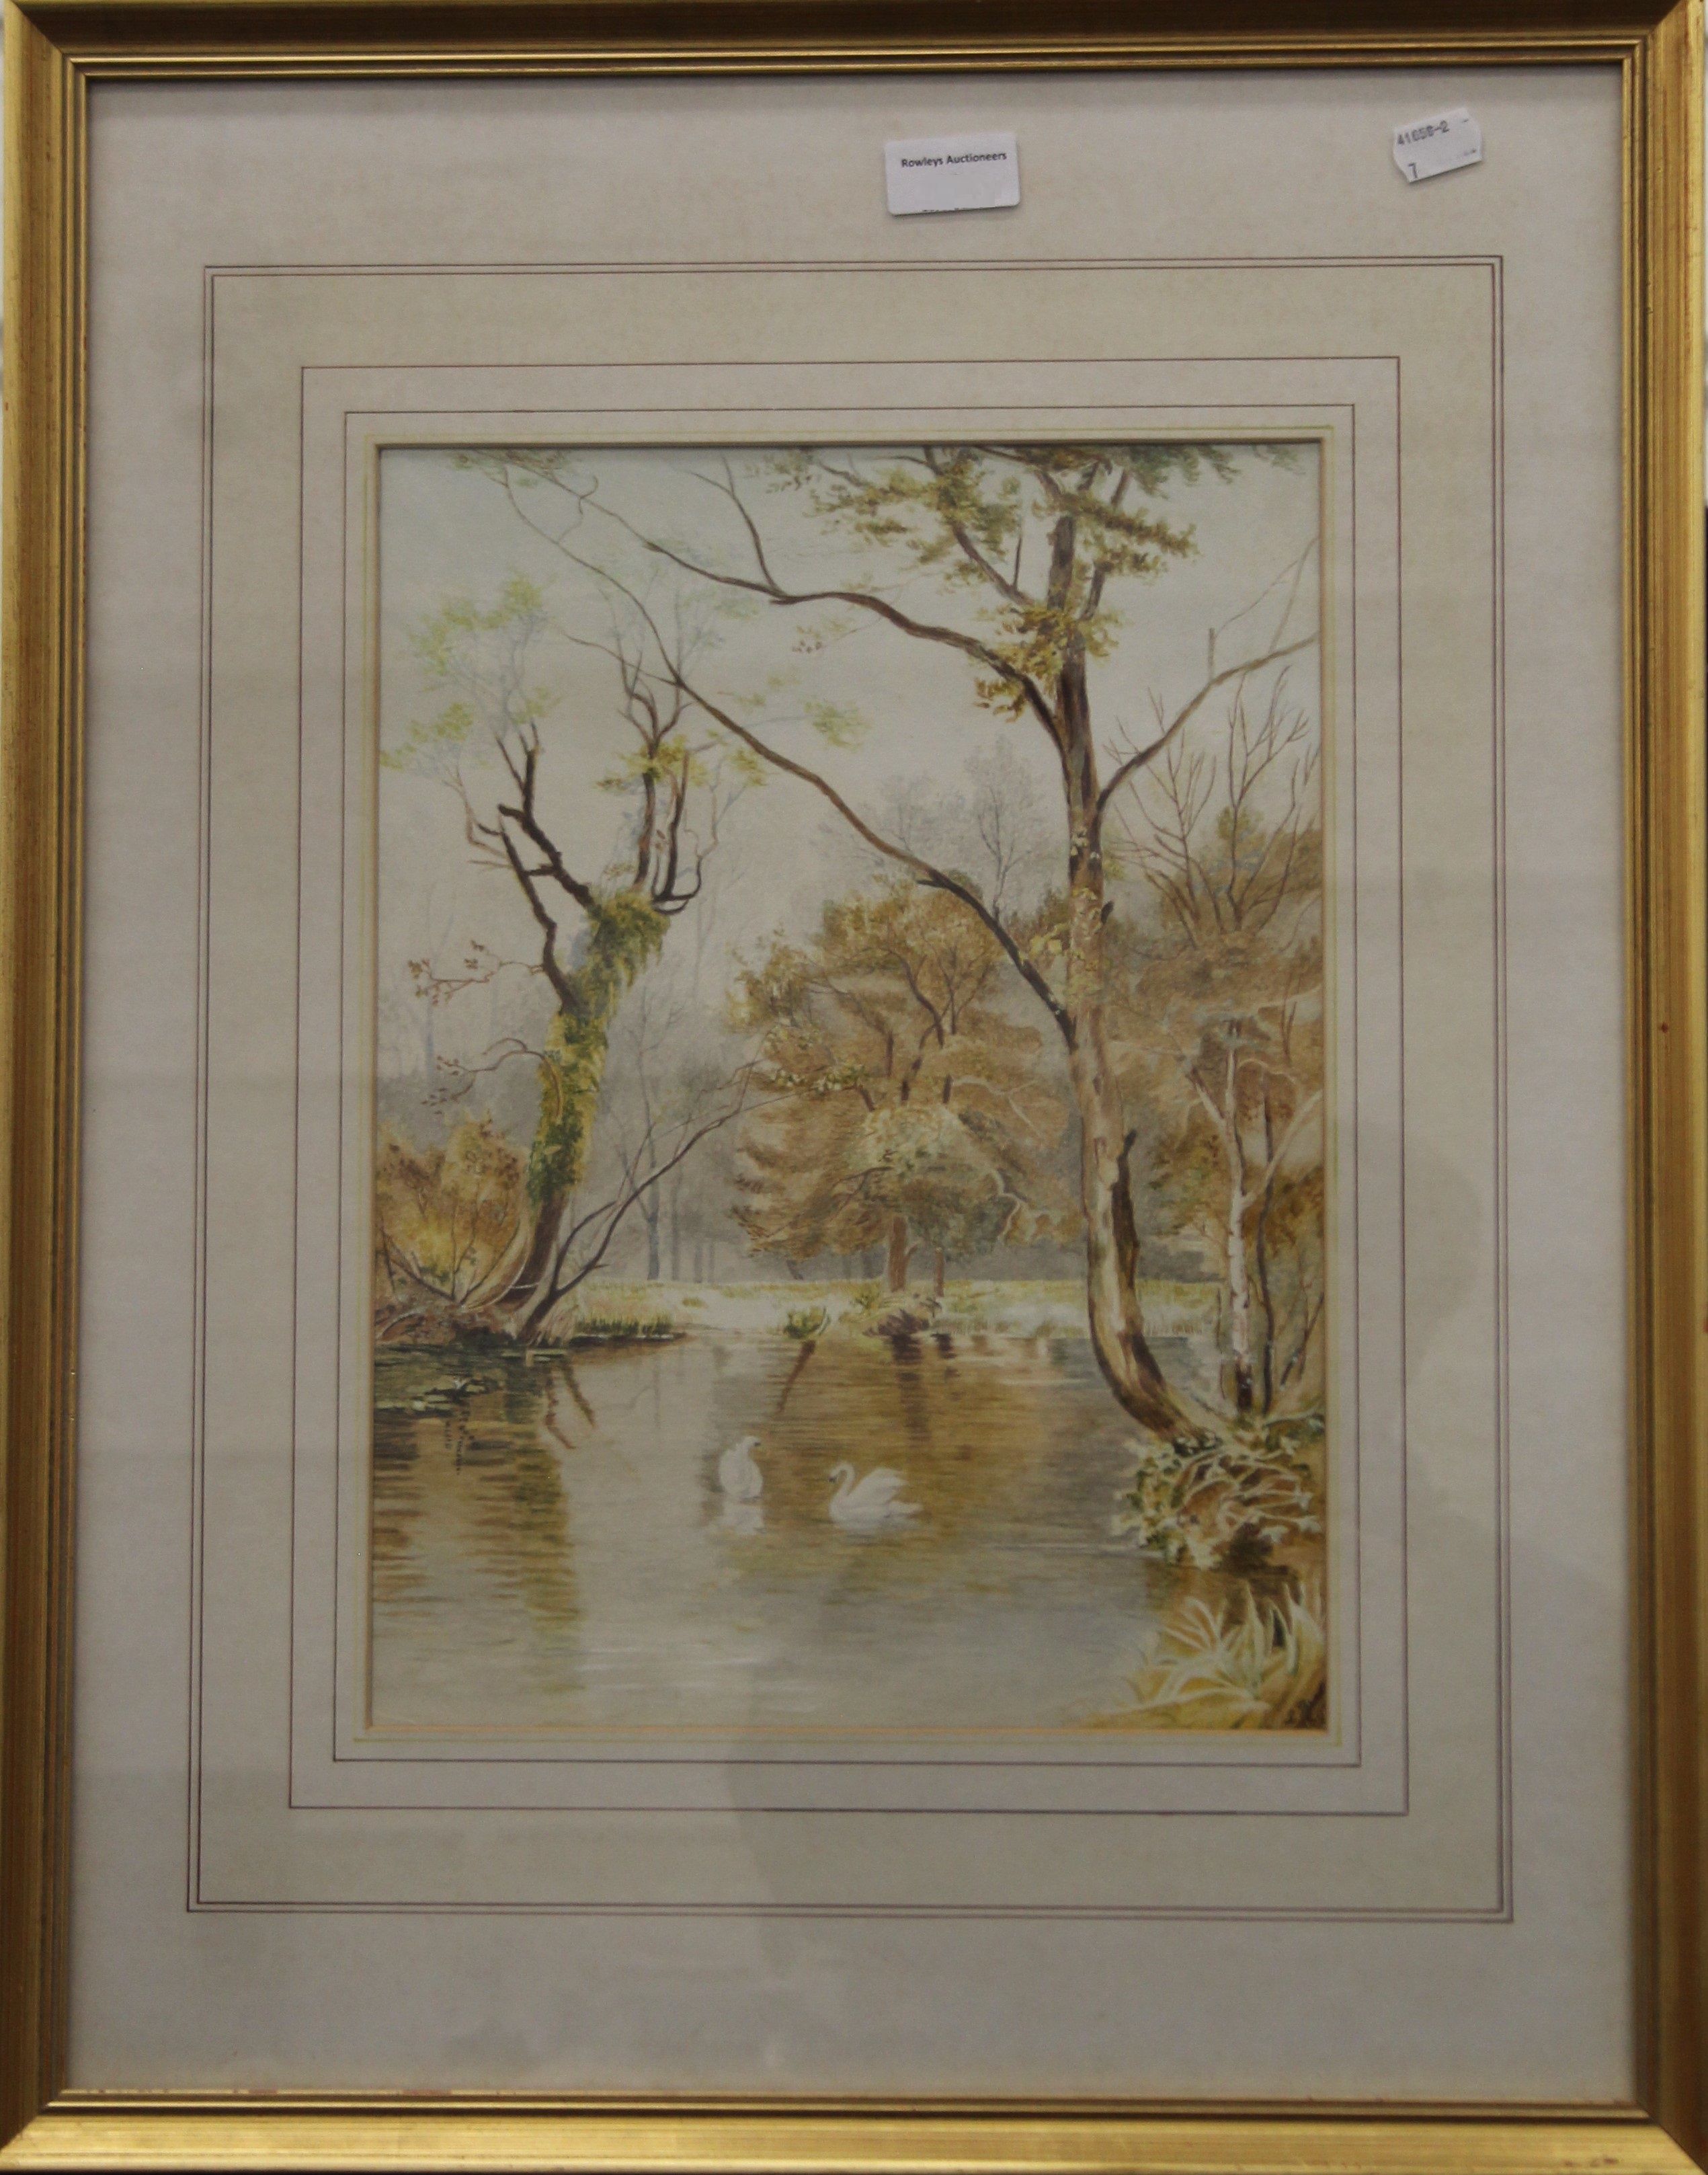 L BRADY, Swans on a River, a pair of watercolours, signed and dated 1899, framed and glazed. - Image 2 of 5